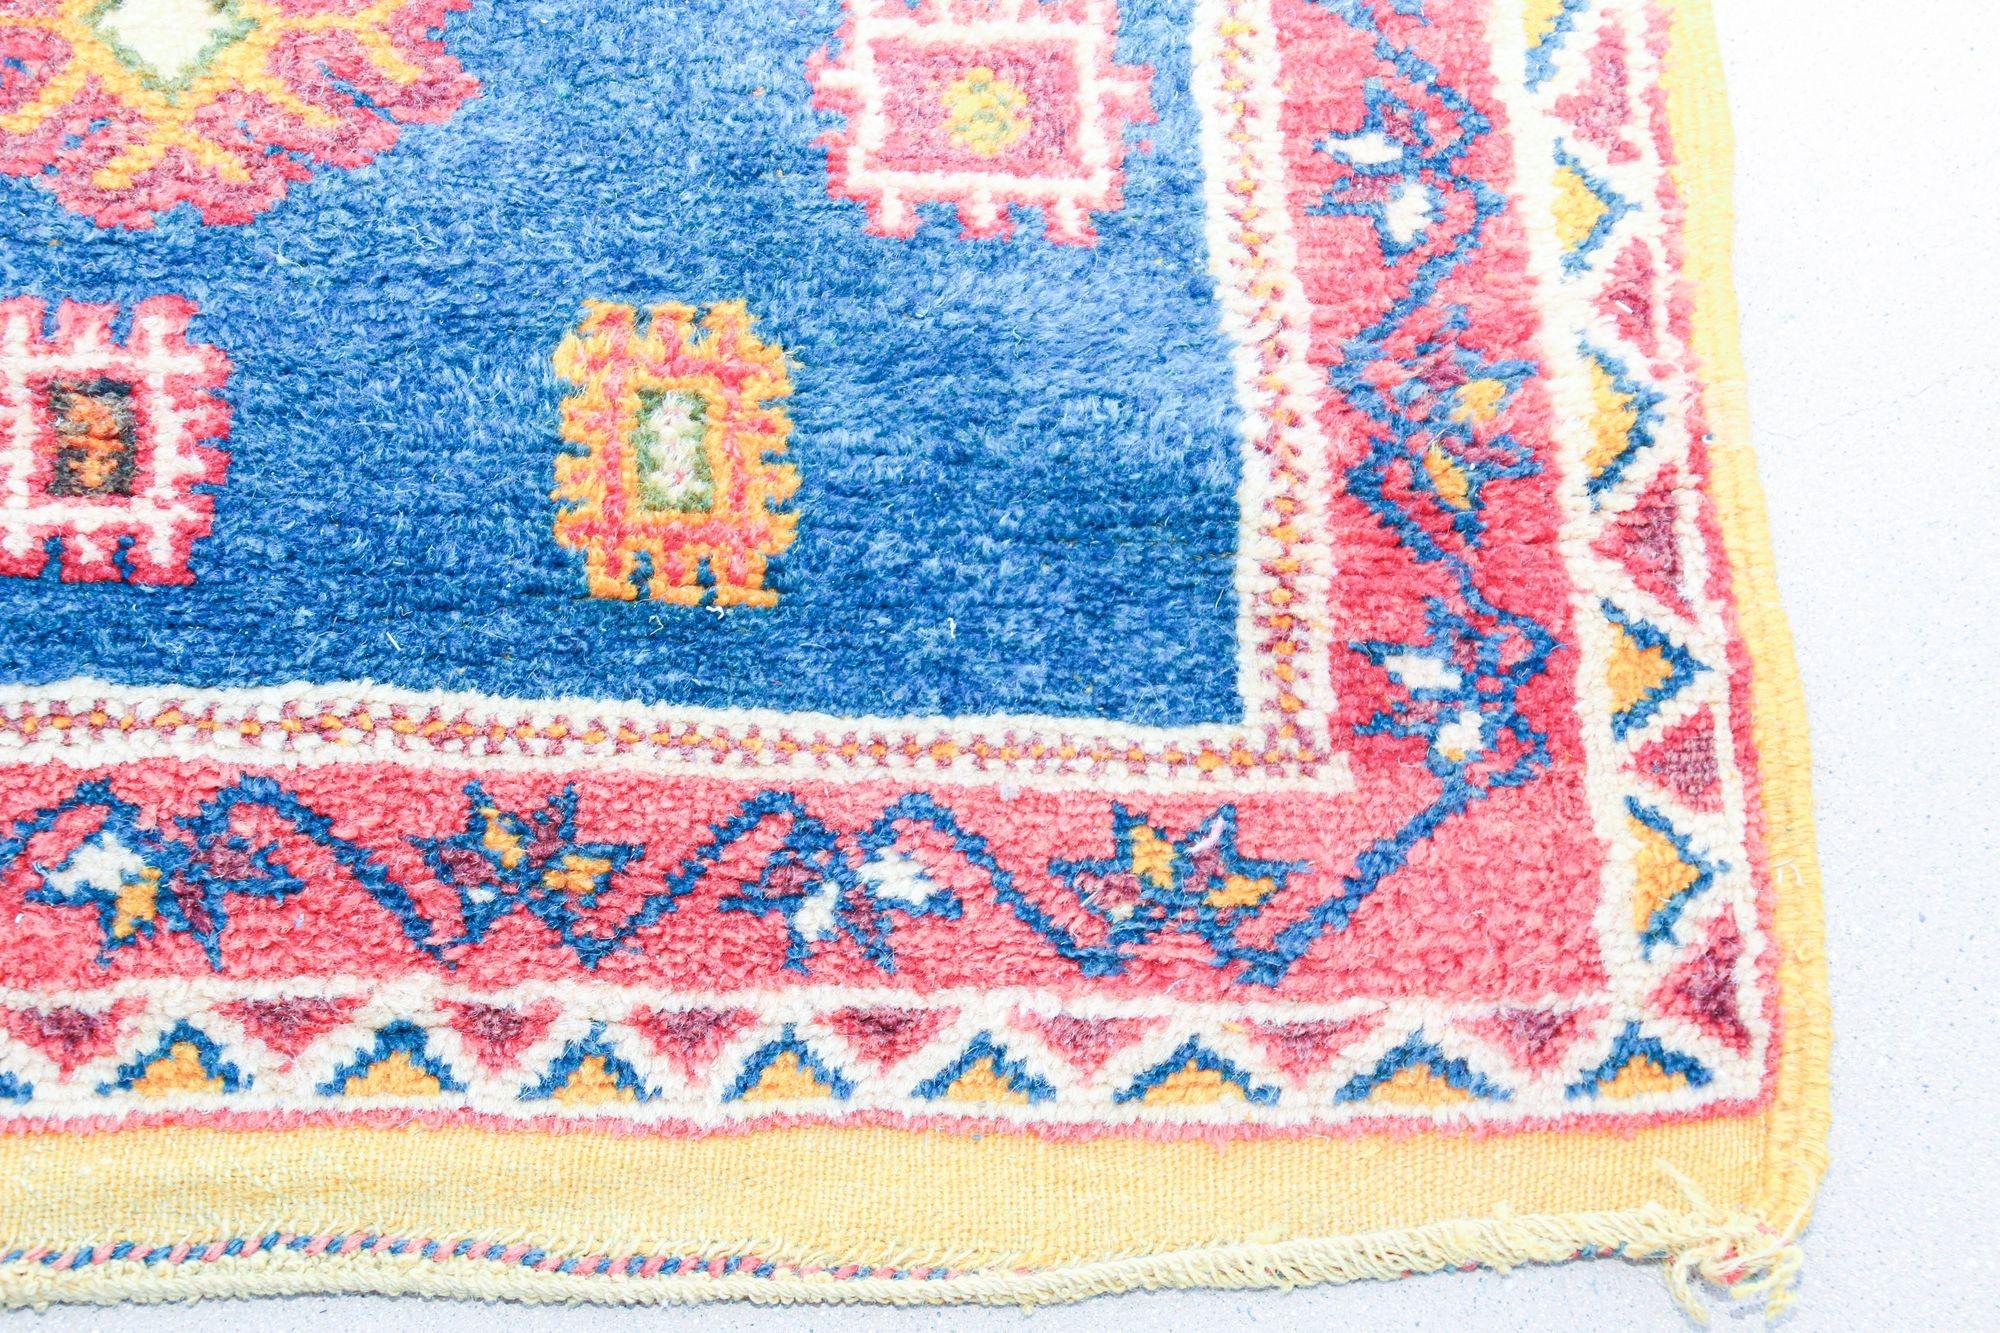 1960s Moroccan Berber Rug in Royal Blue, Pink and Orange Colors In Good Condition For Sale In North Hollywood, CA